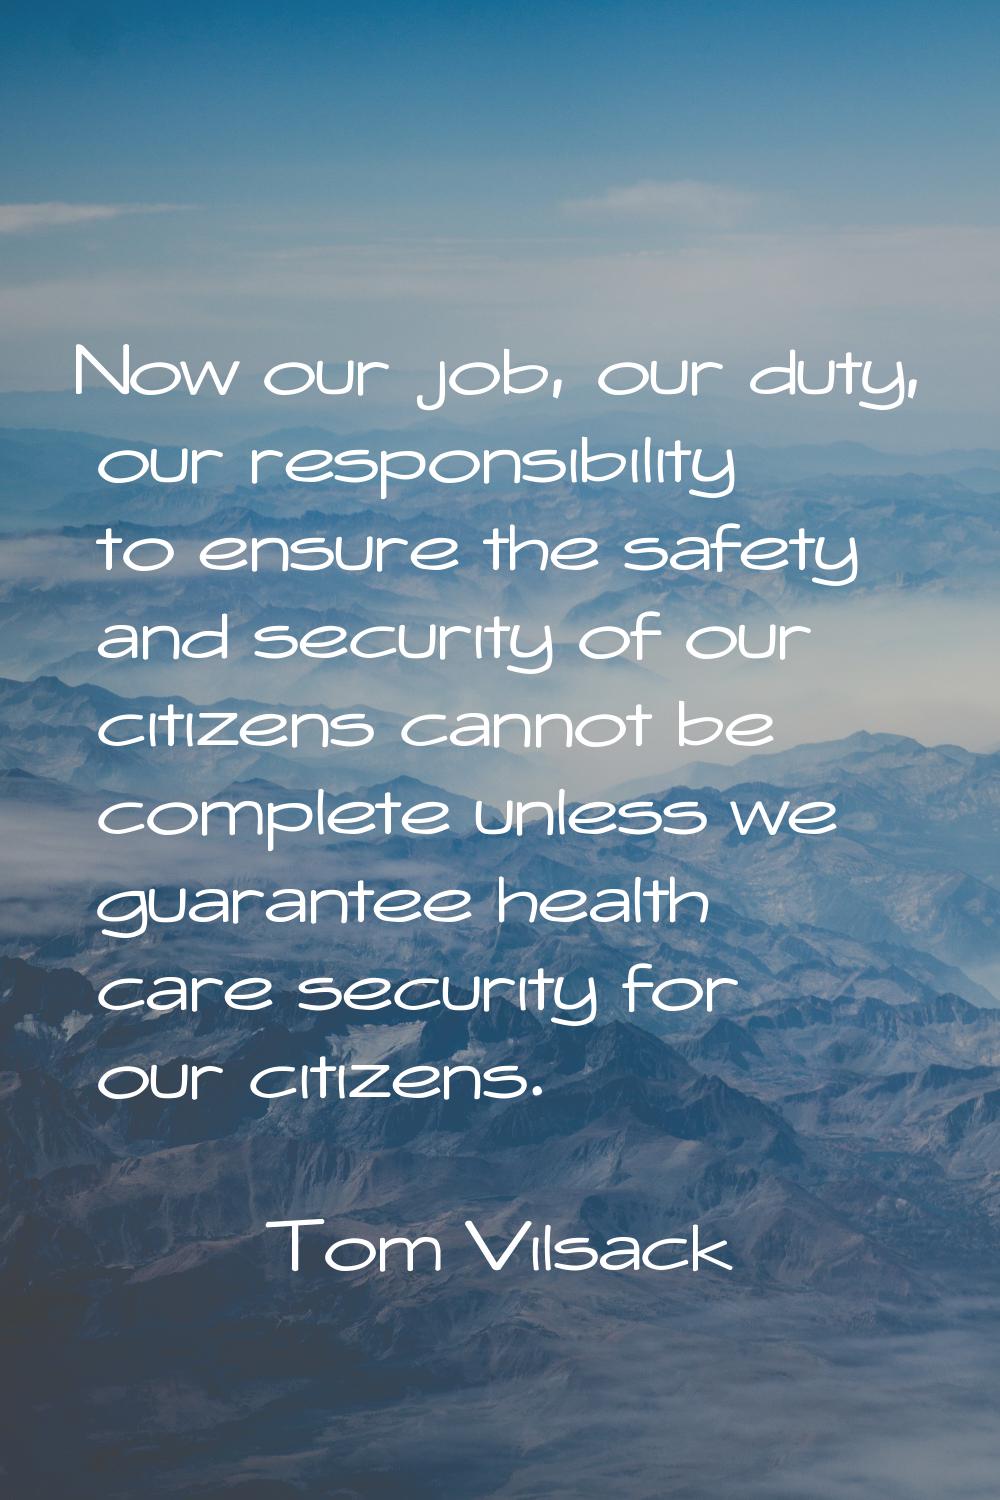 Now our job, our duty, our responsibility to ensure the safety and security of our citizens cannot 